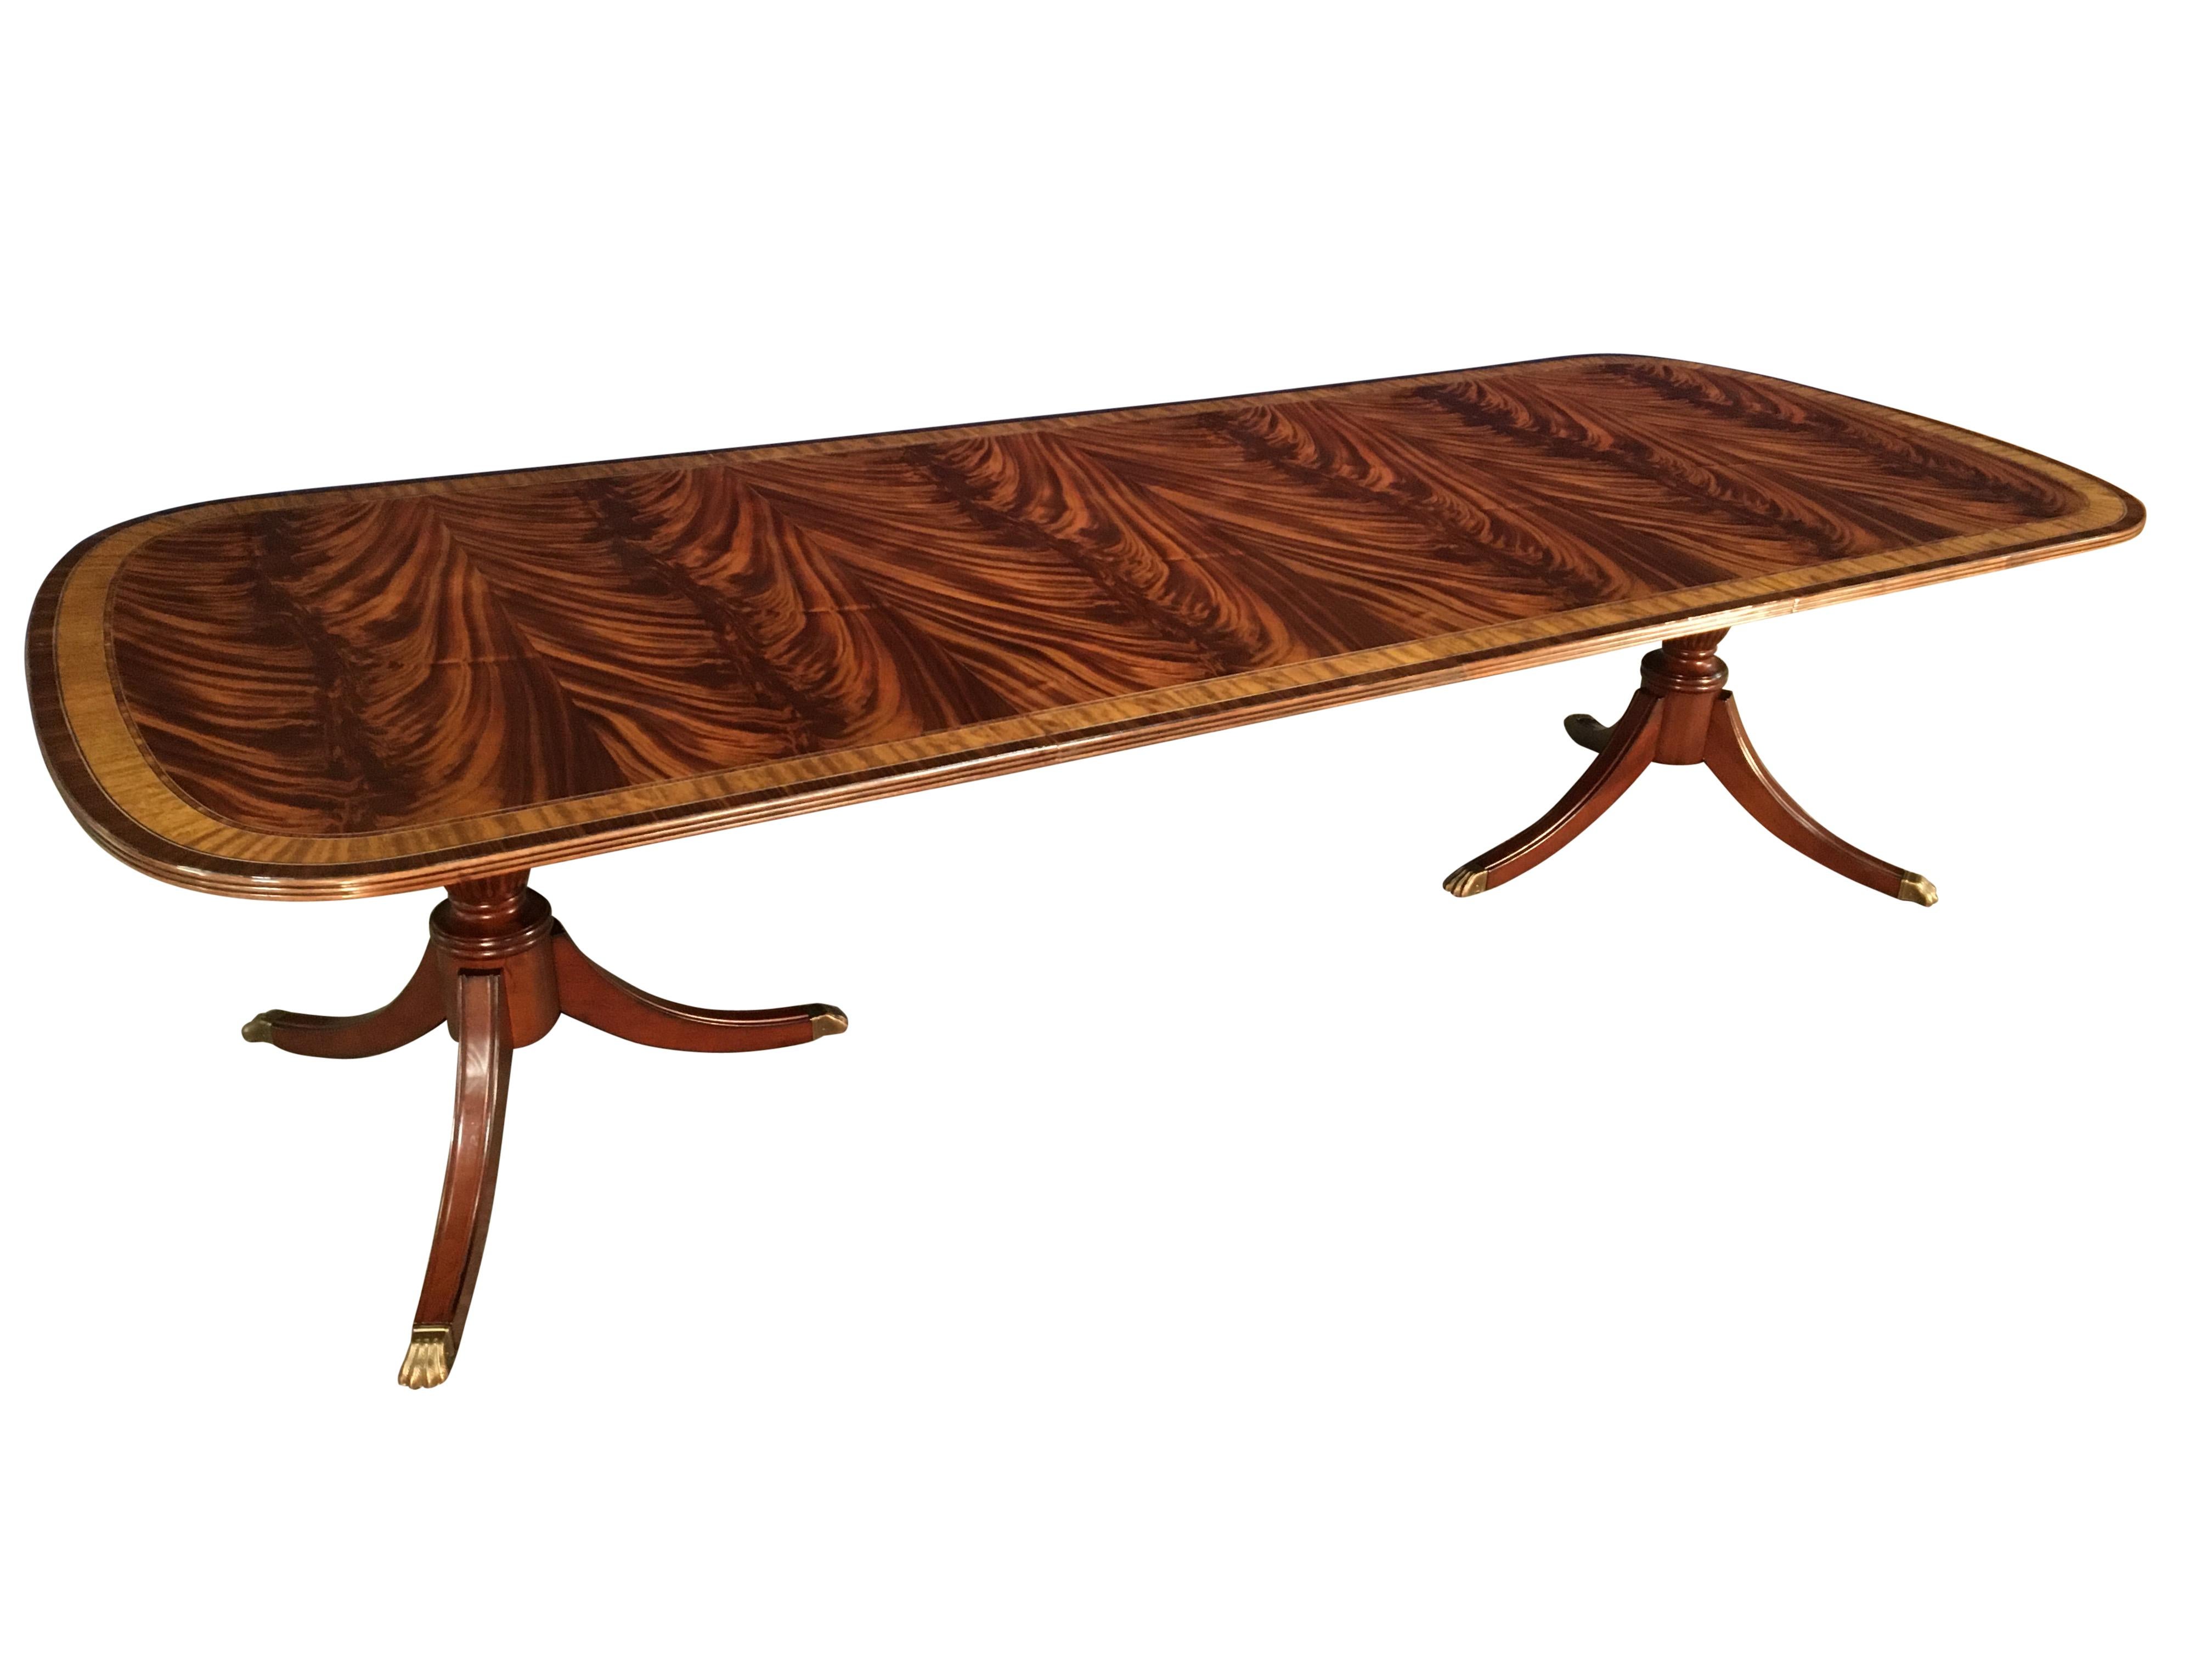 This is a made-to-order large traditional mahogany dining table made in the Leighton Hall shop. It features a field of slip-matched swirly crotch mahogany from West Africa and Satinwood and Pau Ferro borders from South America. It has a hand rubbed